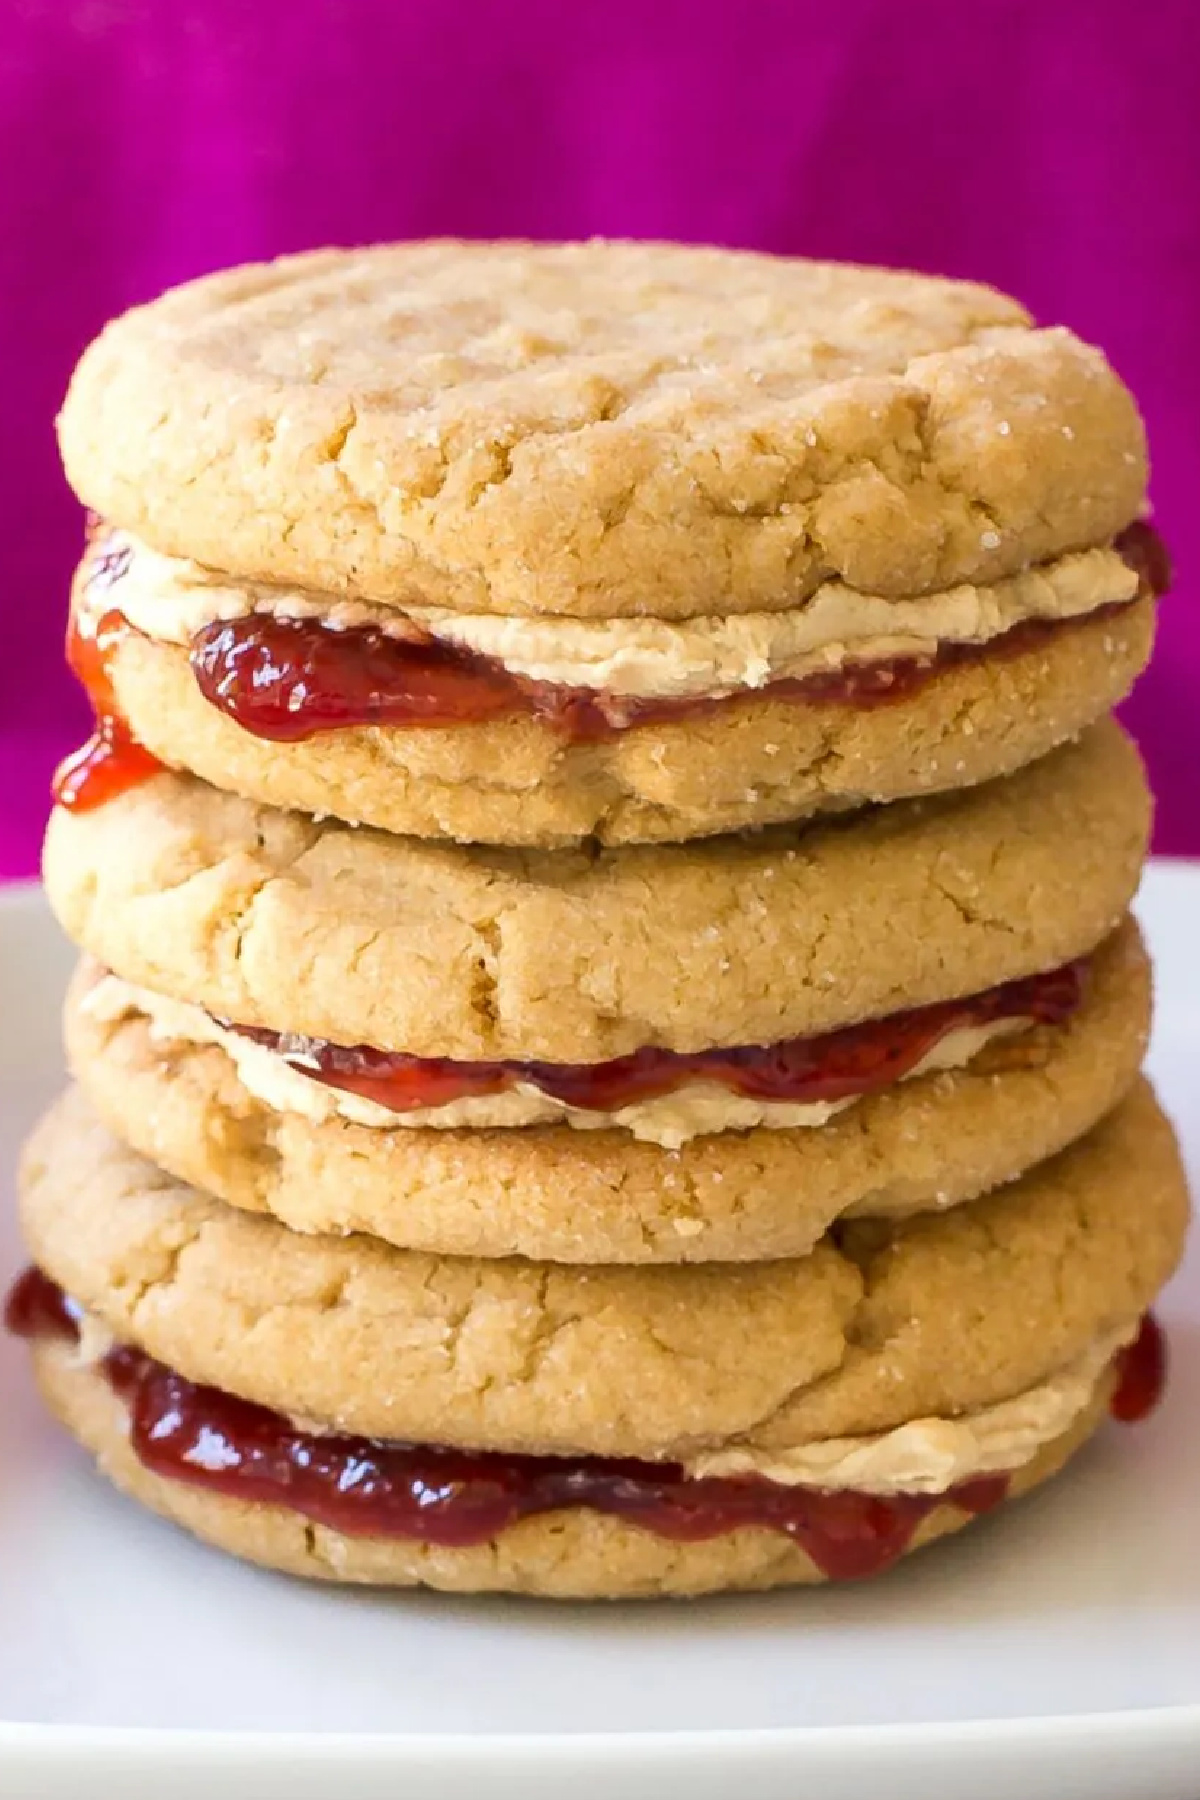 Cheap Party Food Ideas - Peanut Butter and Jelly Sandwich Cookies